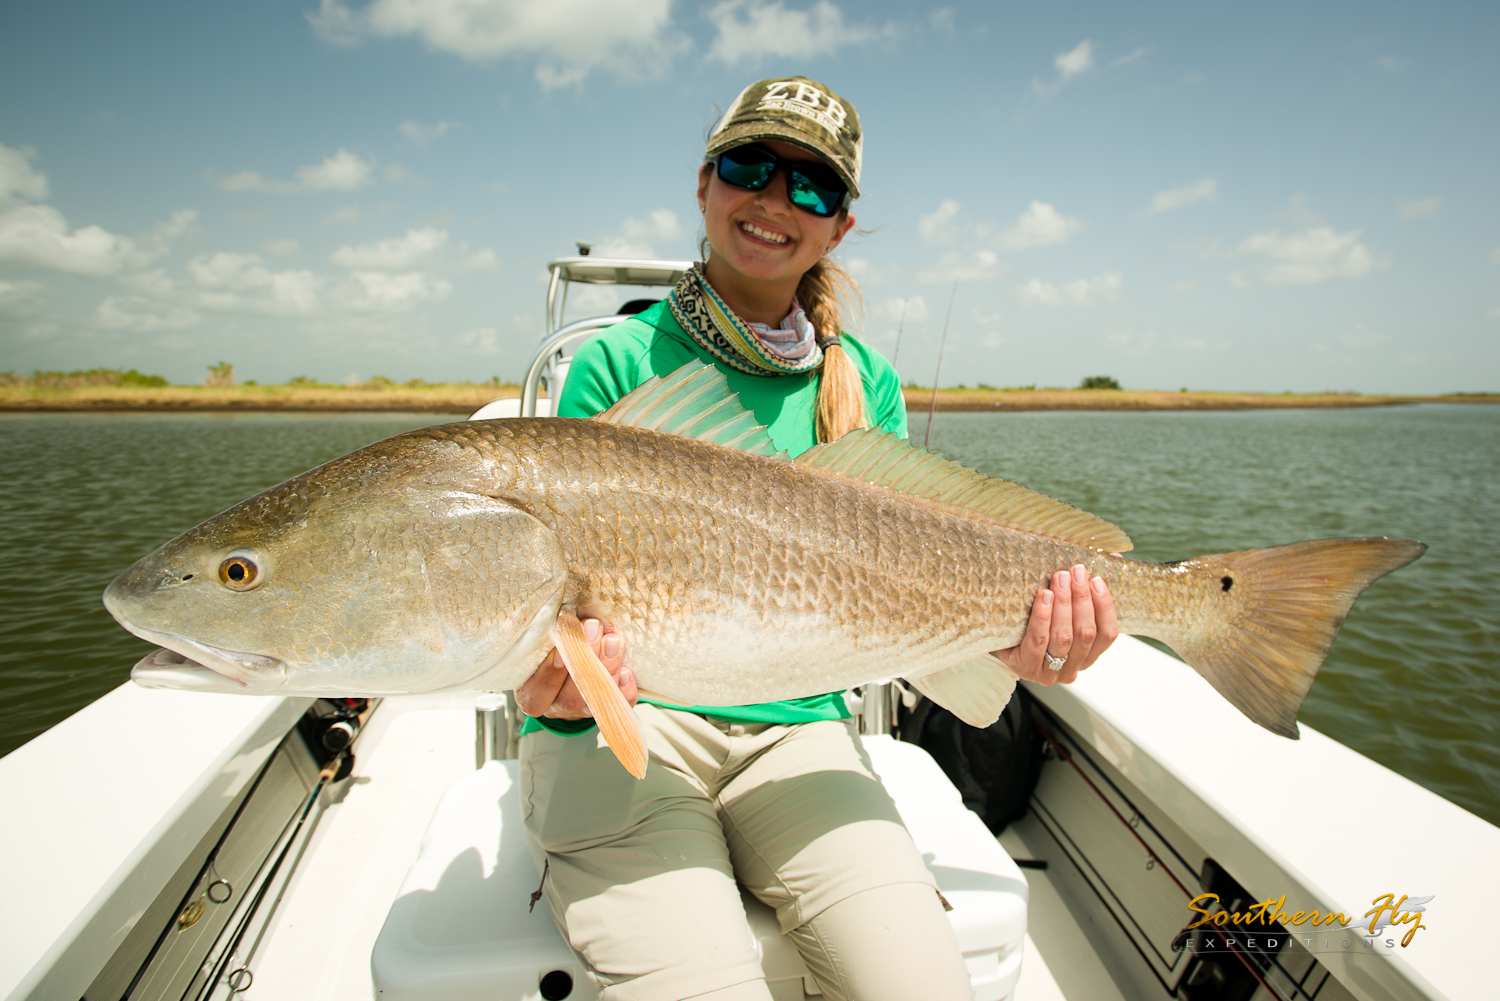 fishing new orleans louisiana with southern fly expeditions and captain brandon keck 